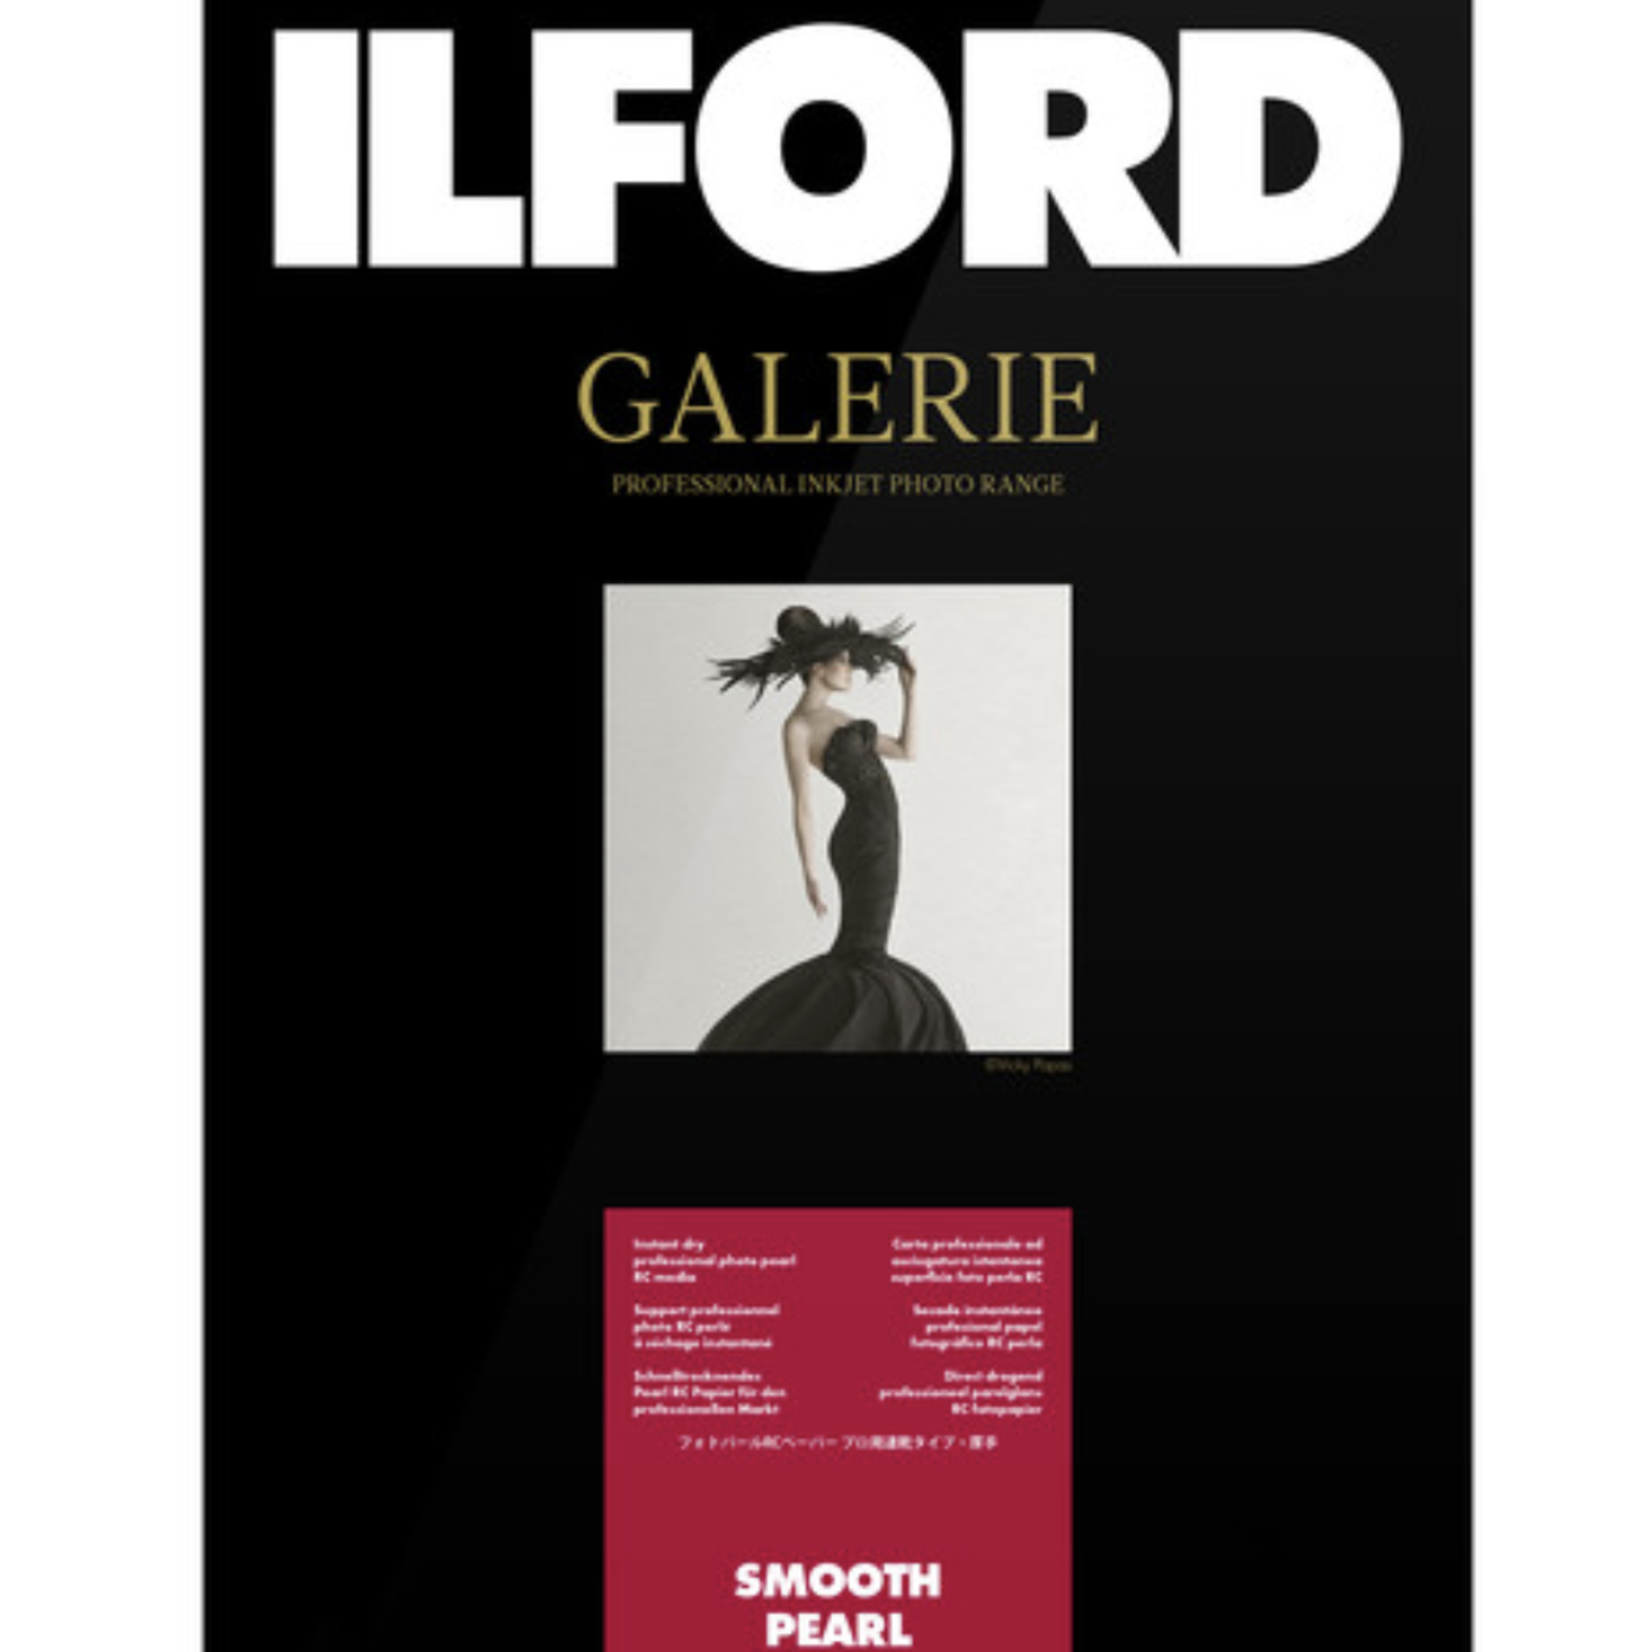 Ilford Ilford Galerie Smooth Pearl (8.5 x 11", 100 Sheets)